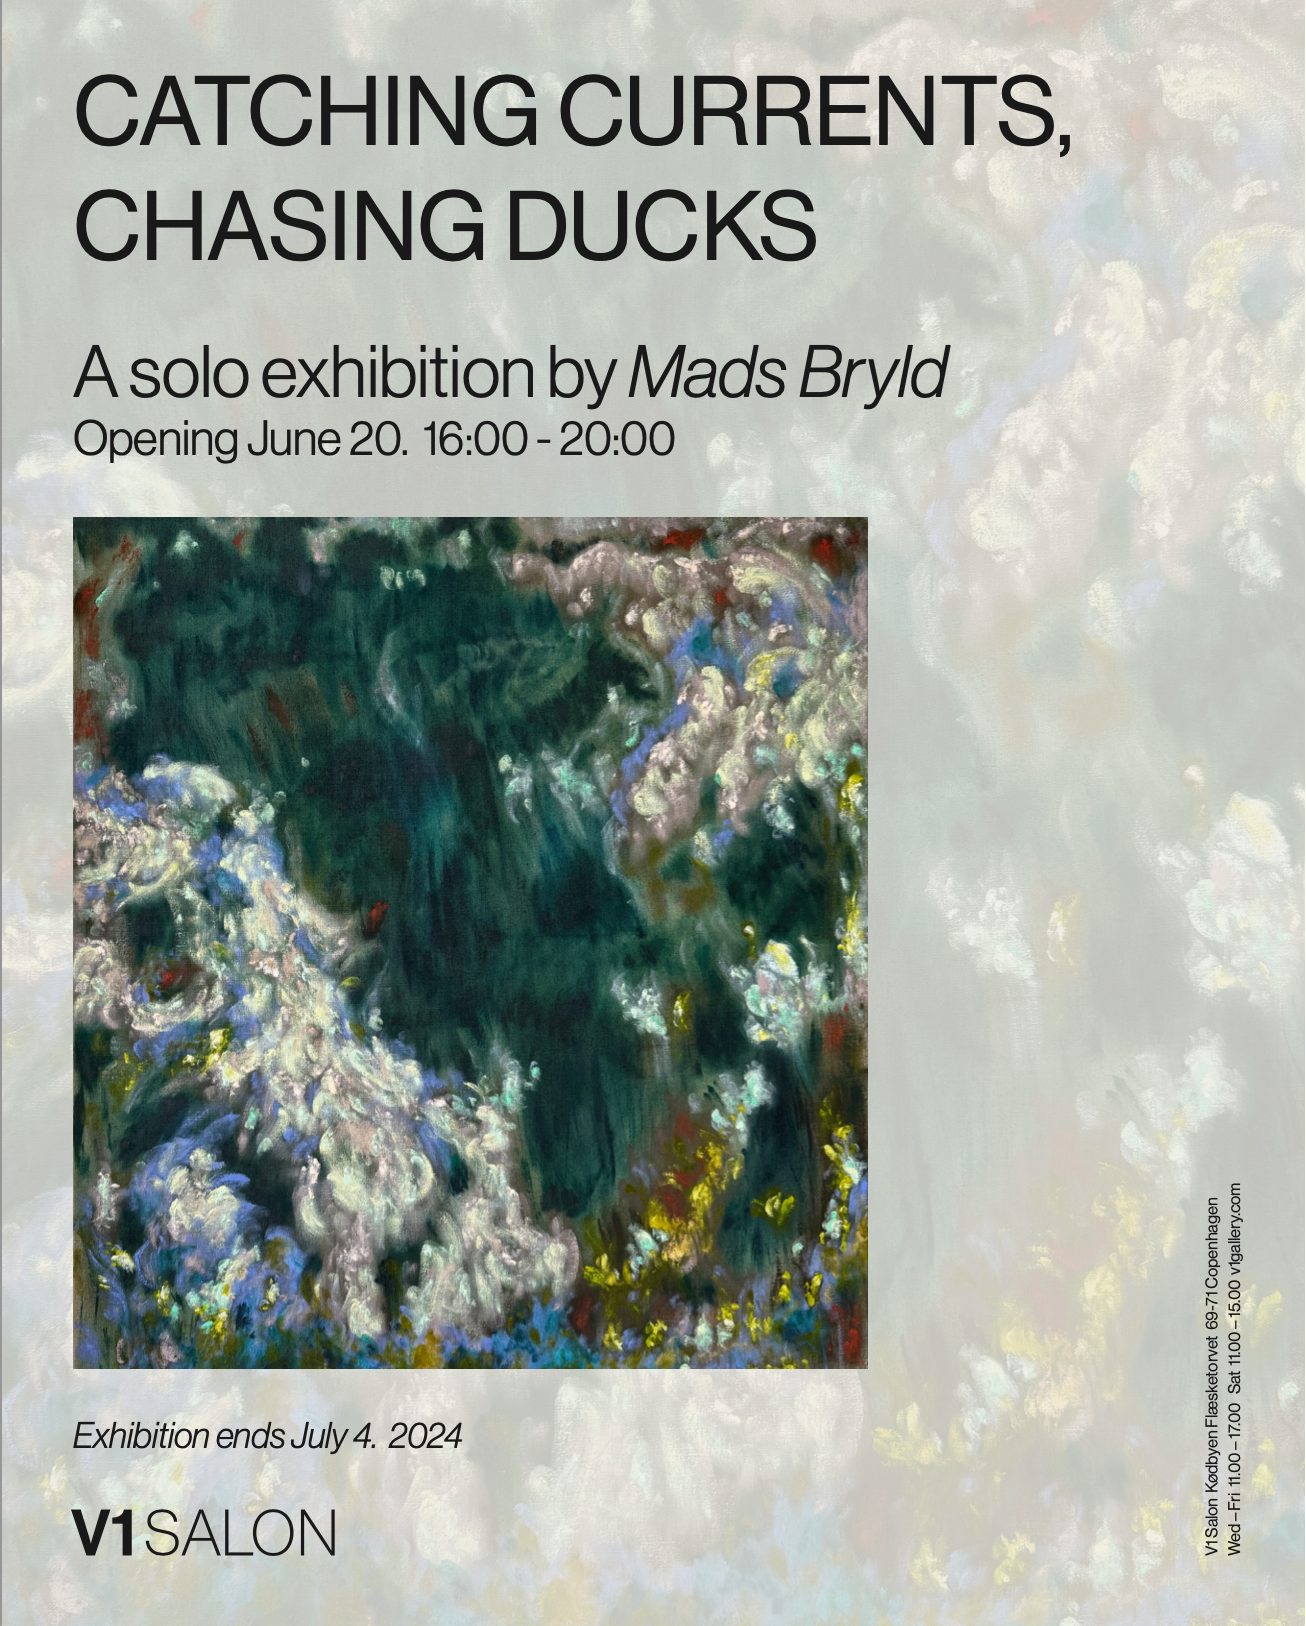 OPENING SOON: Catching currents, chasing ducks a solo exhibition by Mads Bryld